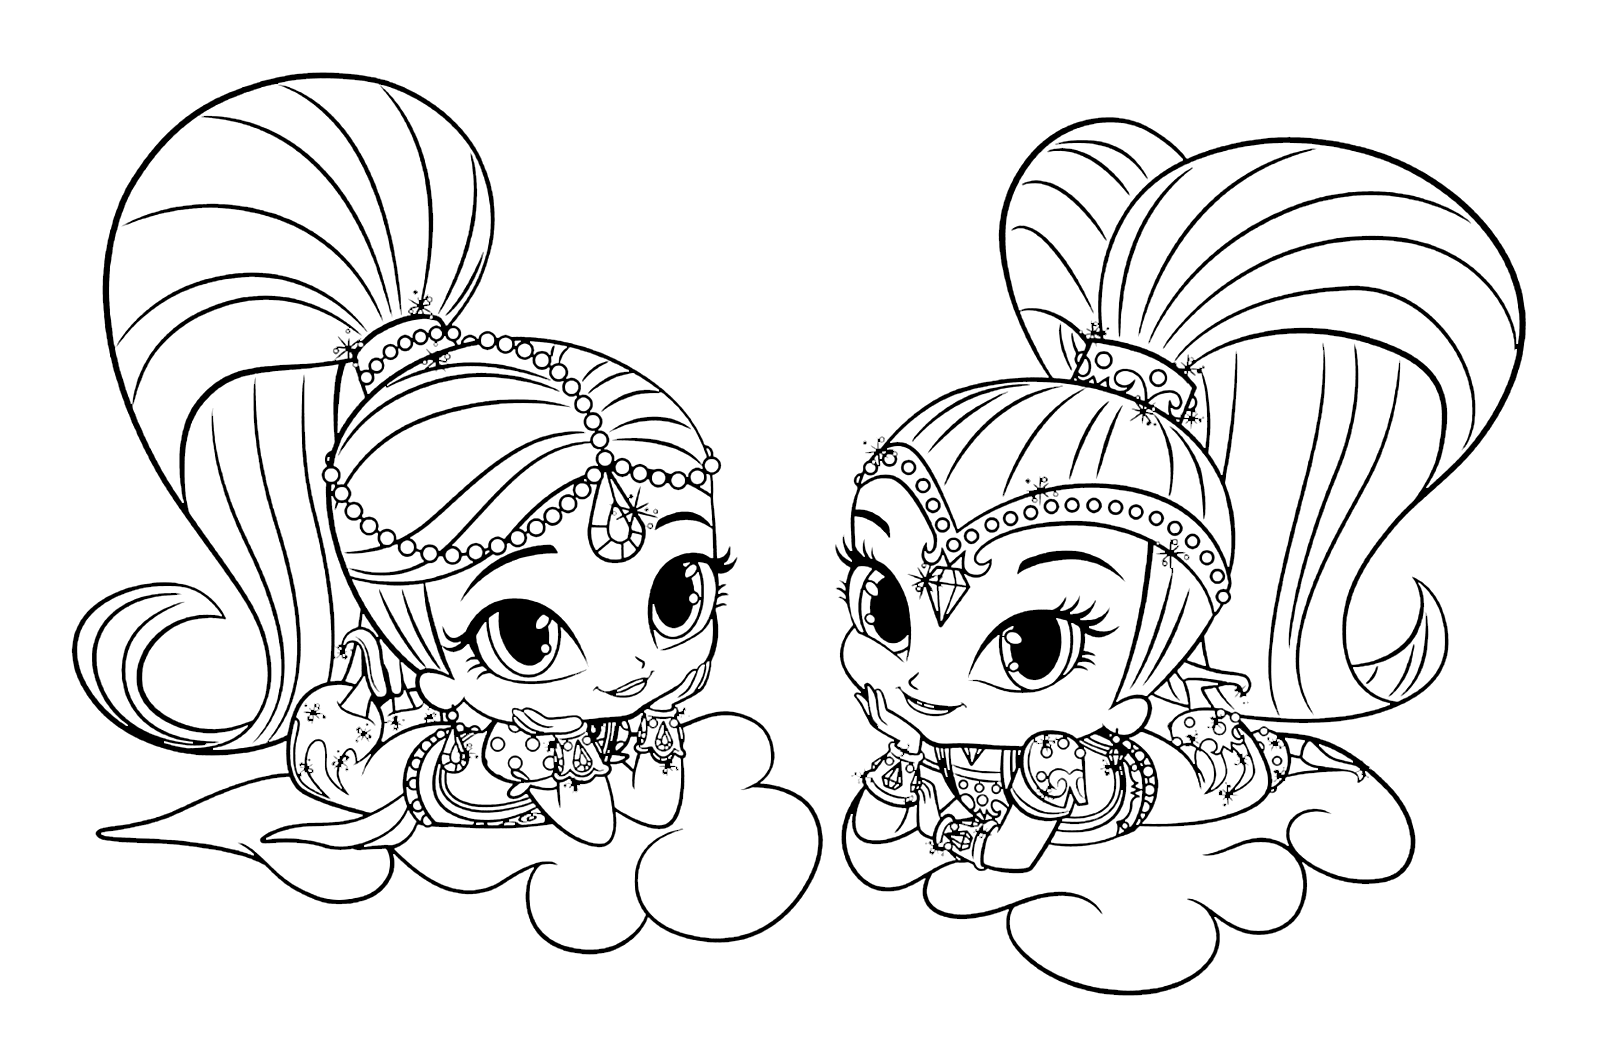 Shimmer and Shine - The Shimmer and Shine twins above the clouds